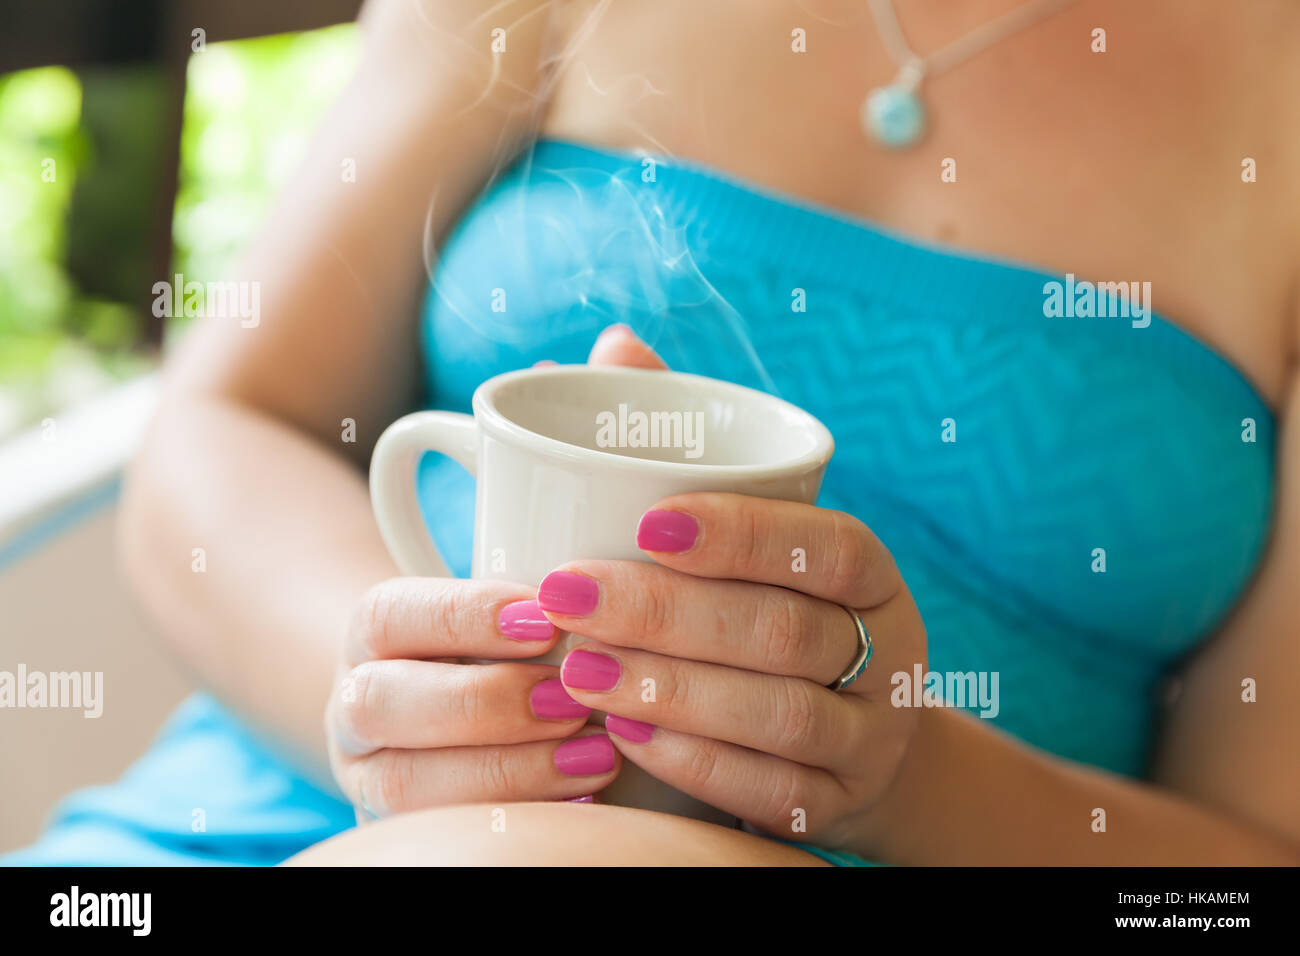 Young Caucasian woman in blue dress holds white cup of coffee in her hands. Close-up outdoor photo, selective focus on hands Stock Photo